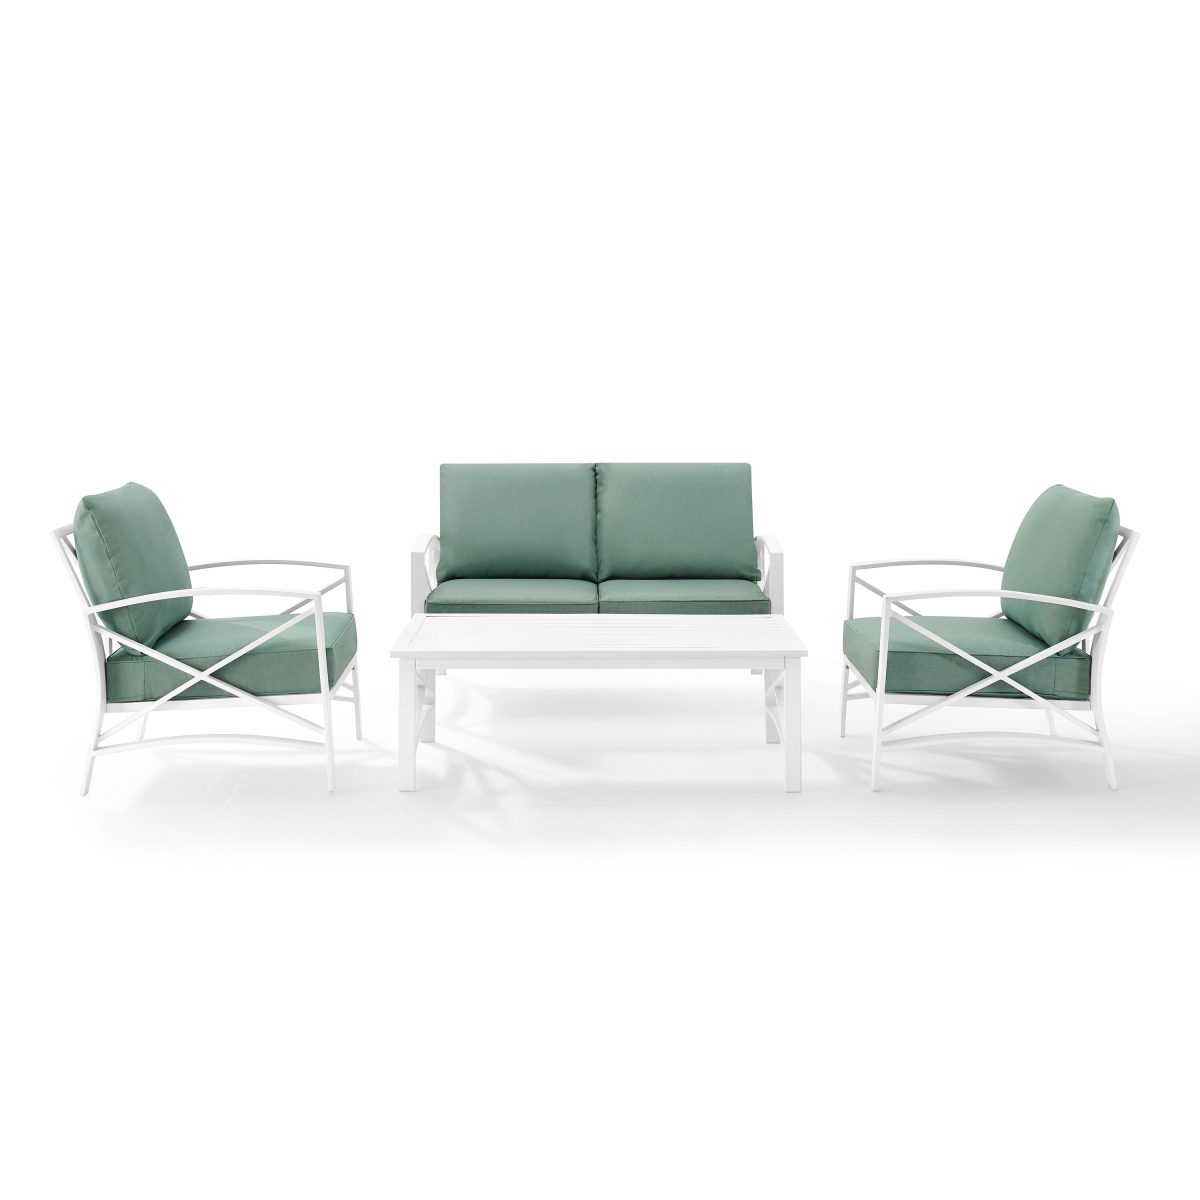 Ko60009wh-mi Kaplan 4-piece Outdoor Seating Set In White With Mist Cushions